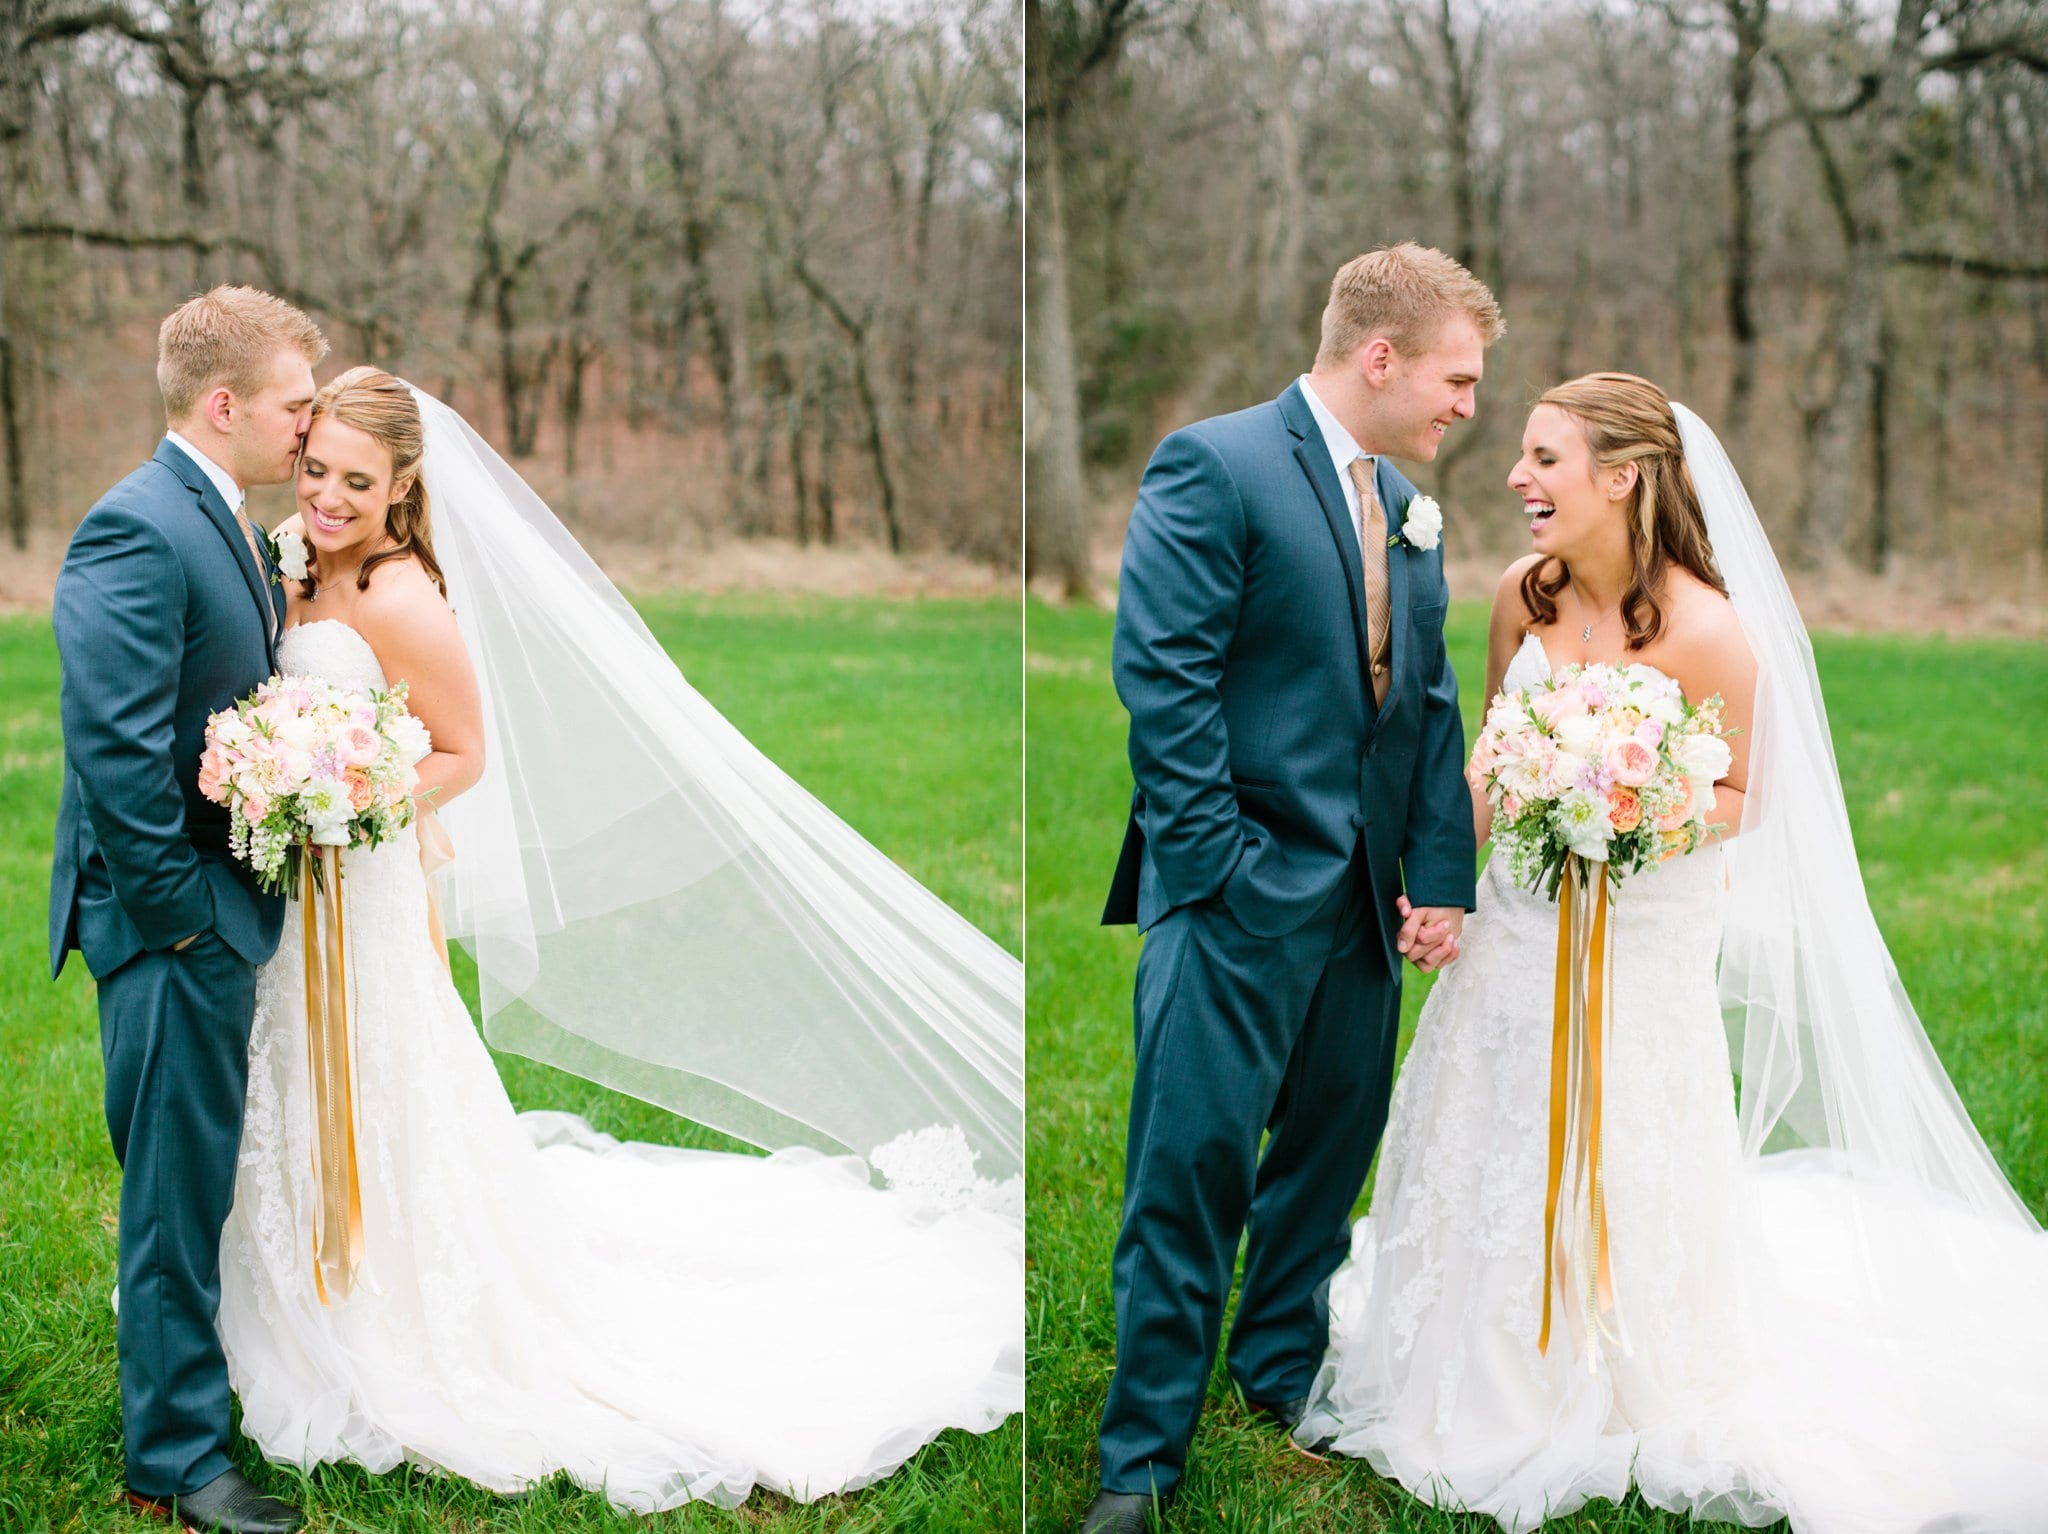 View More: http://tuckerimages.pass.us/cateswedding